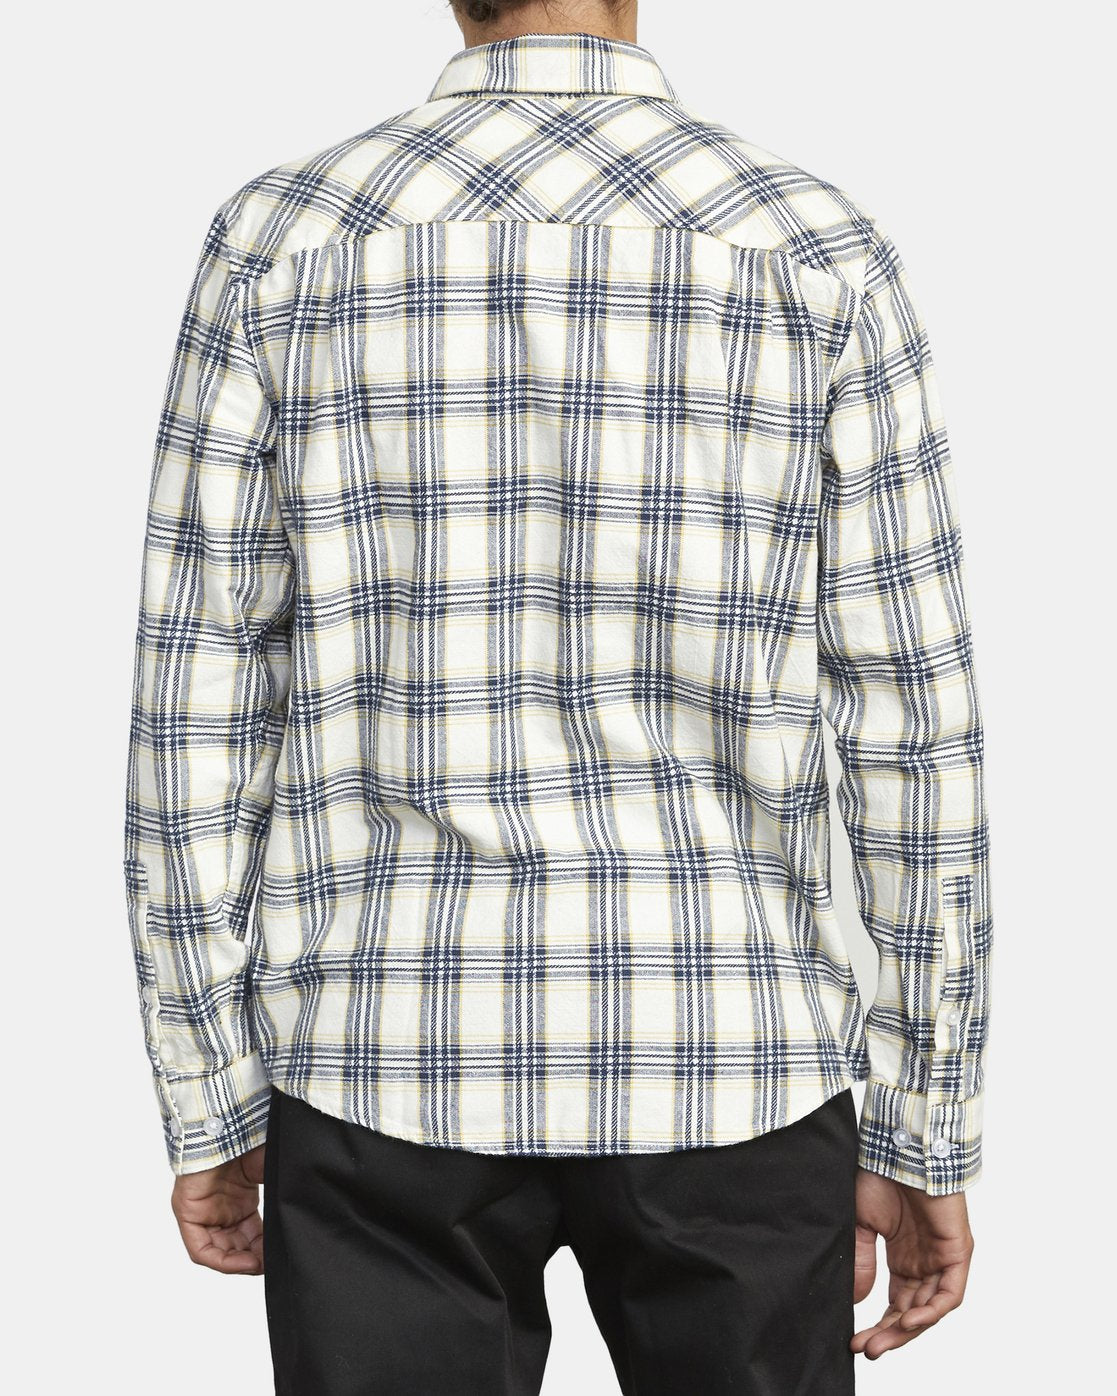 That'll Work Flannel Long Sleeve